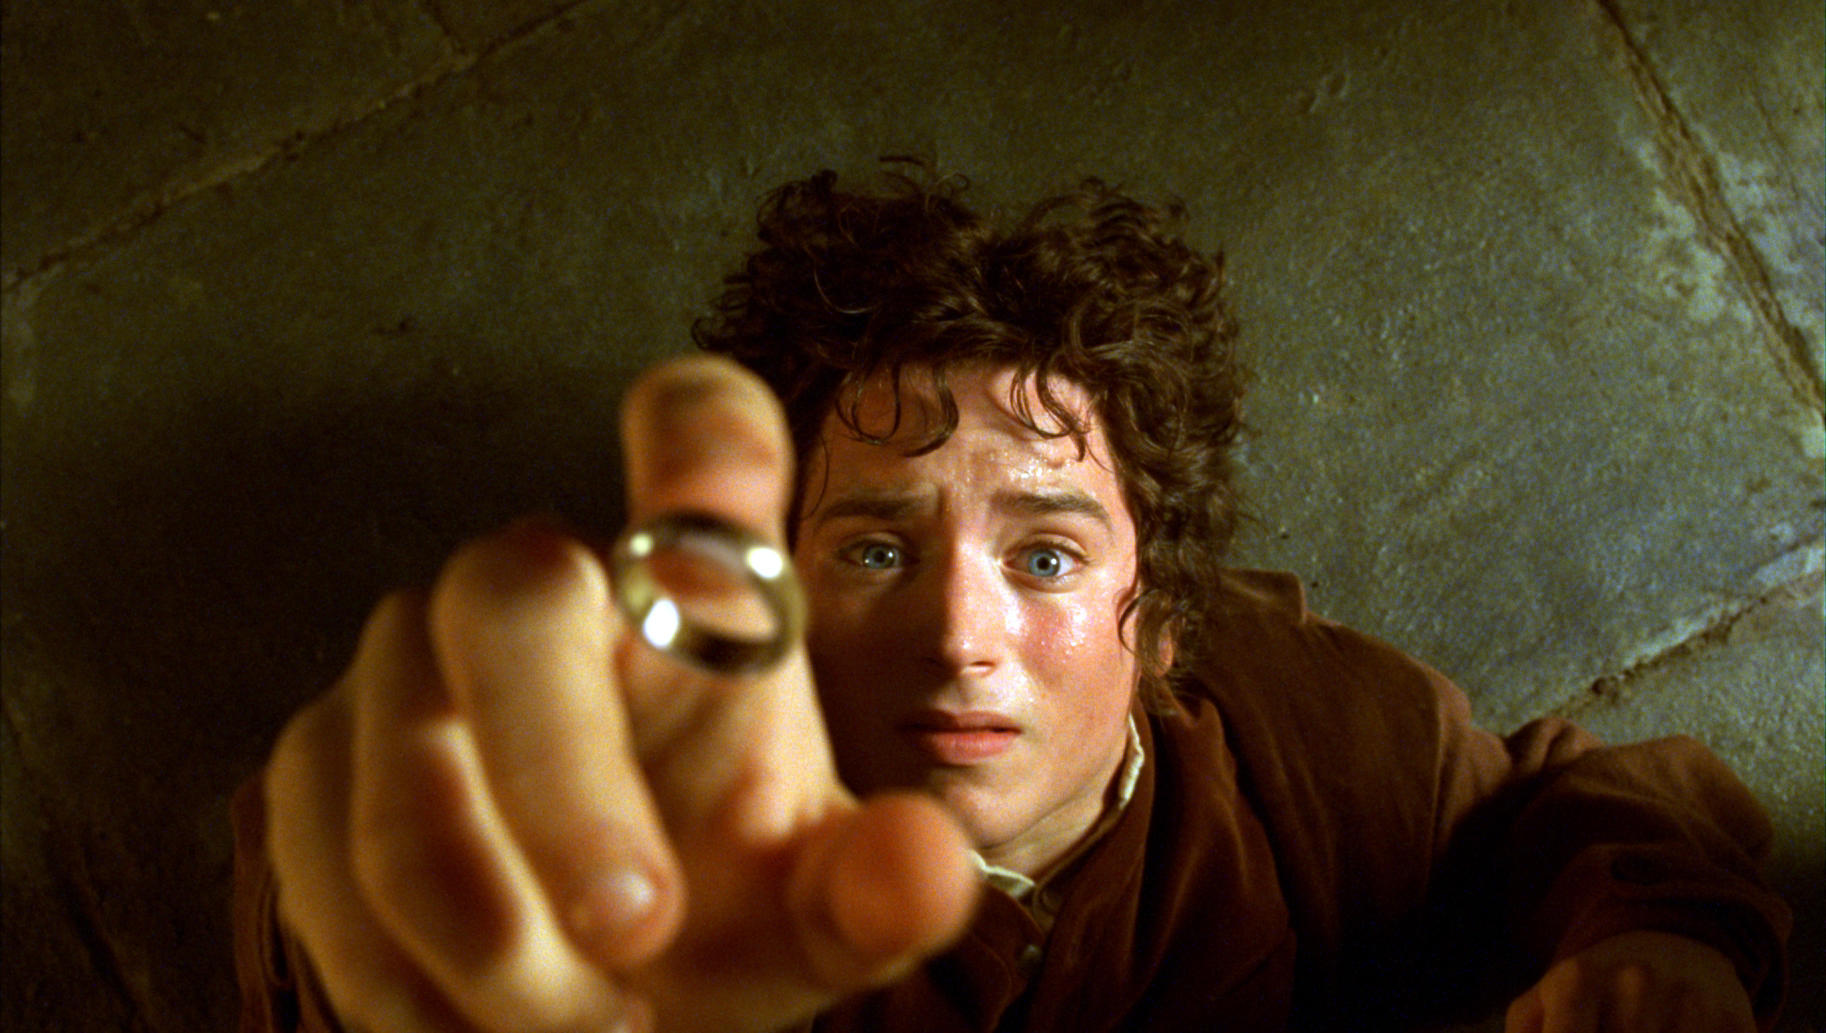 the-lord-of-the-rings-the-fellowship-of-the-ring-e9c06a.jpg 